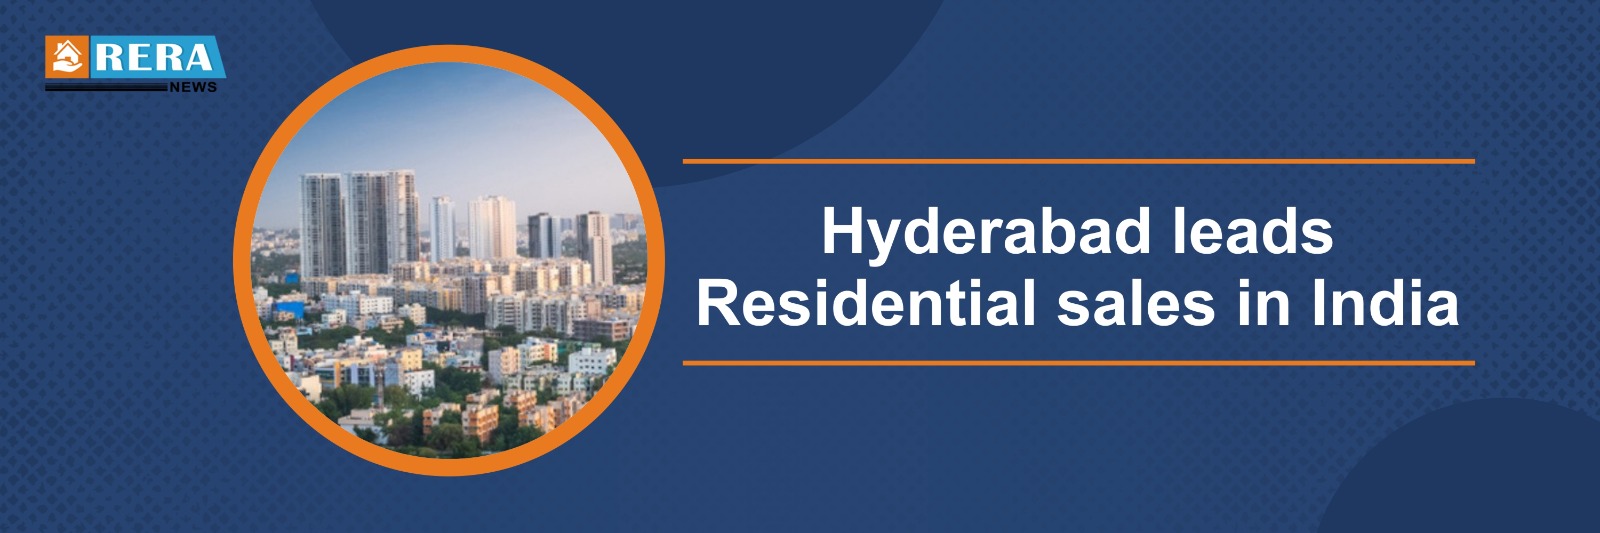  Hyderabad emerges as the leader in residential sales across India.